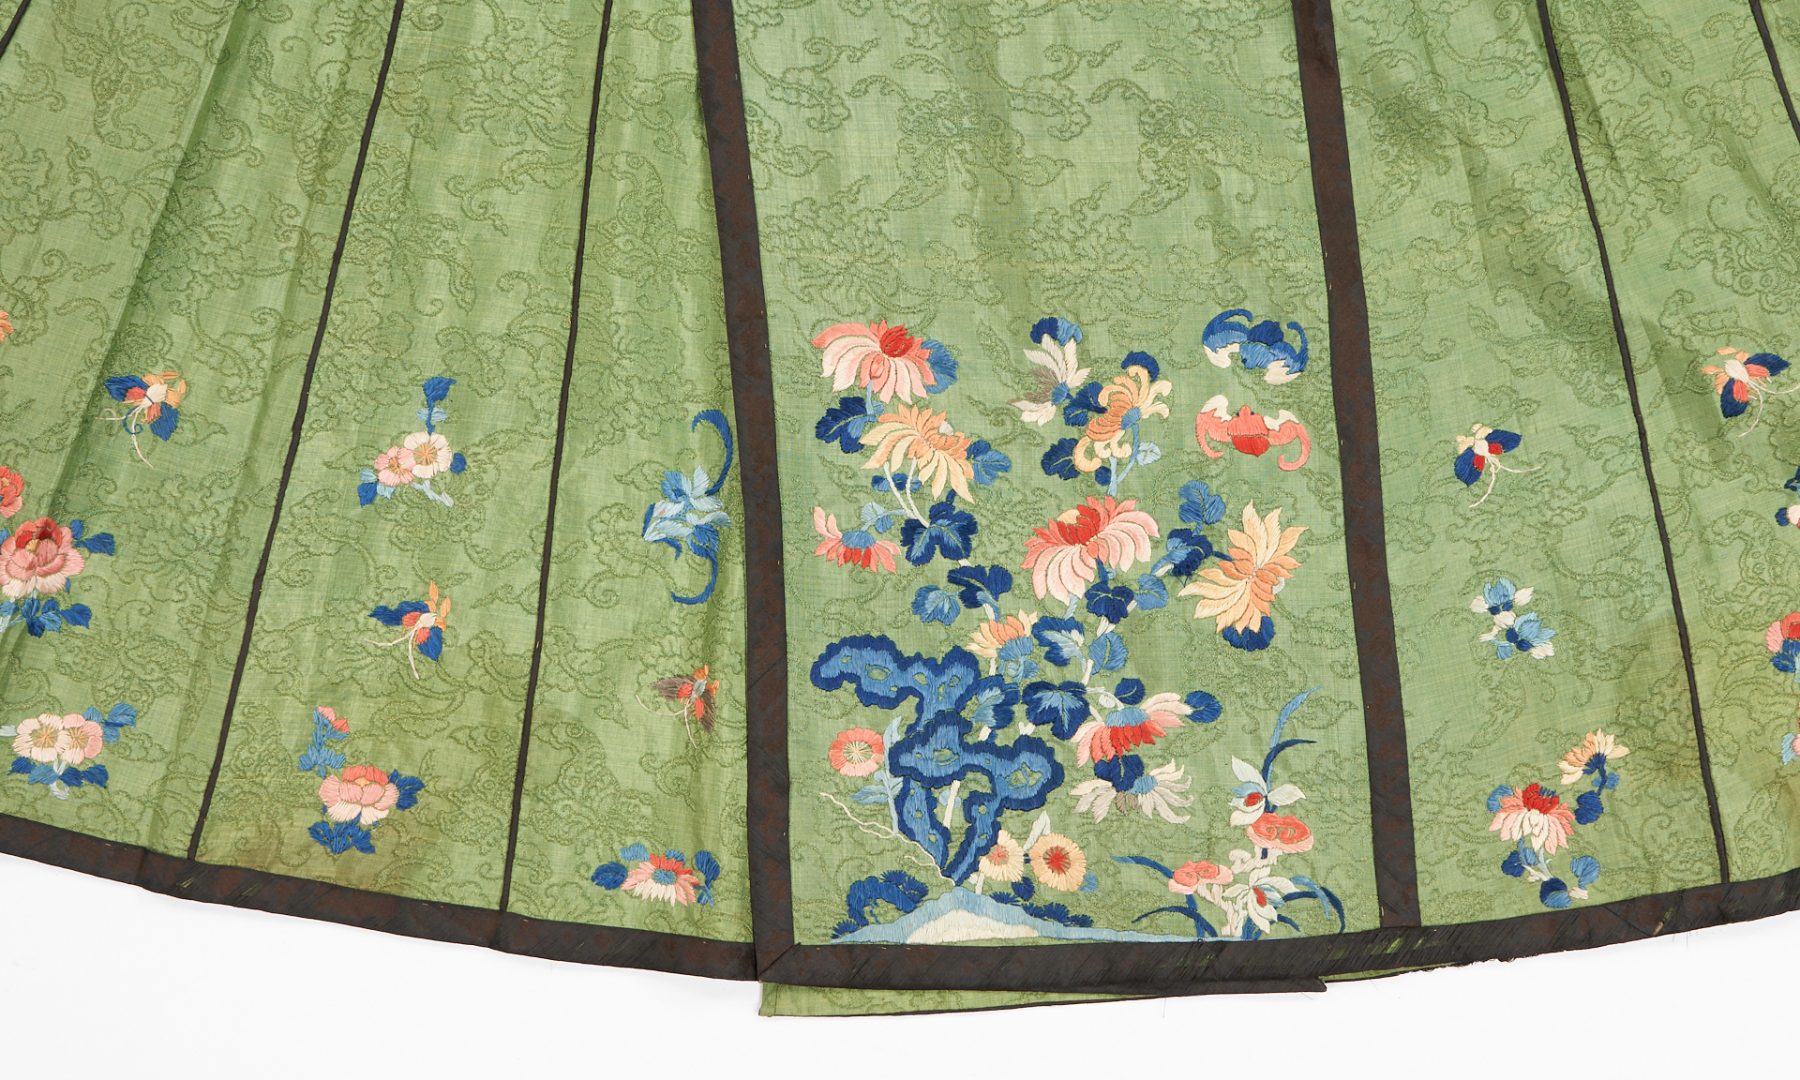 Lot 31: 2 Chinese Floral Silk Wedding Skirts